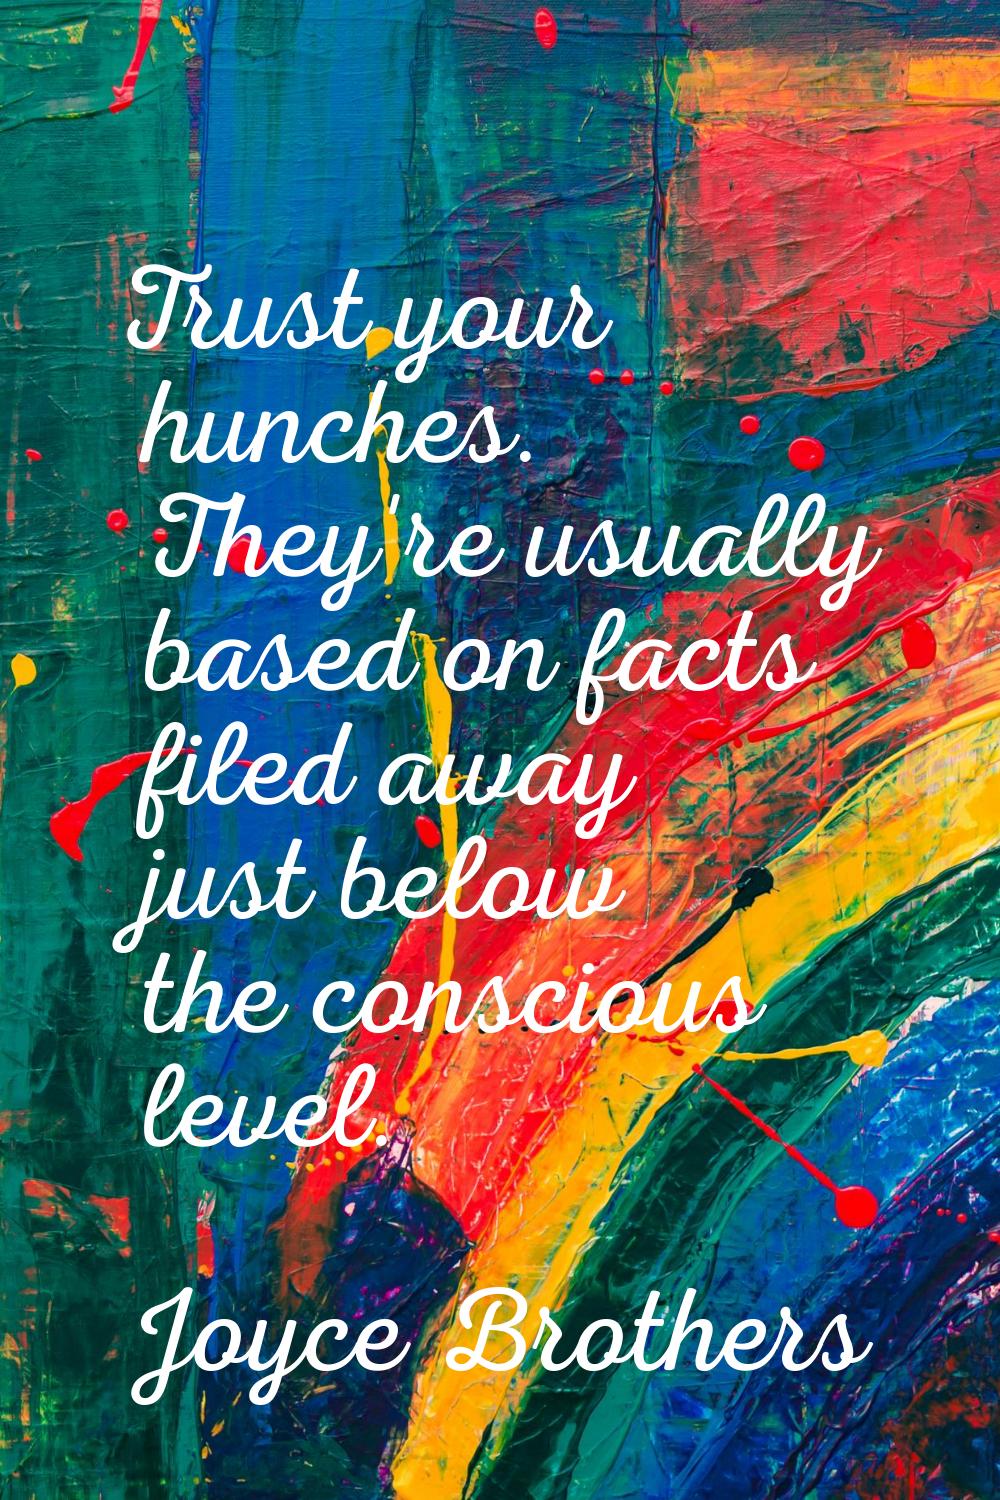 Trust your hunches. They're usually based on facts filed away just below the conscious level.